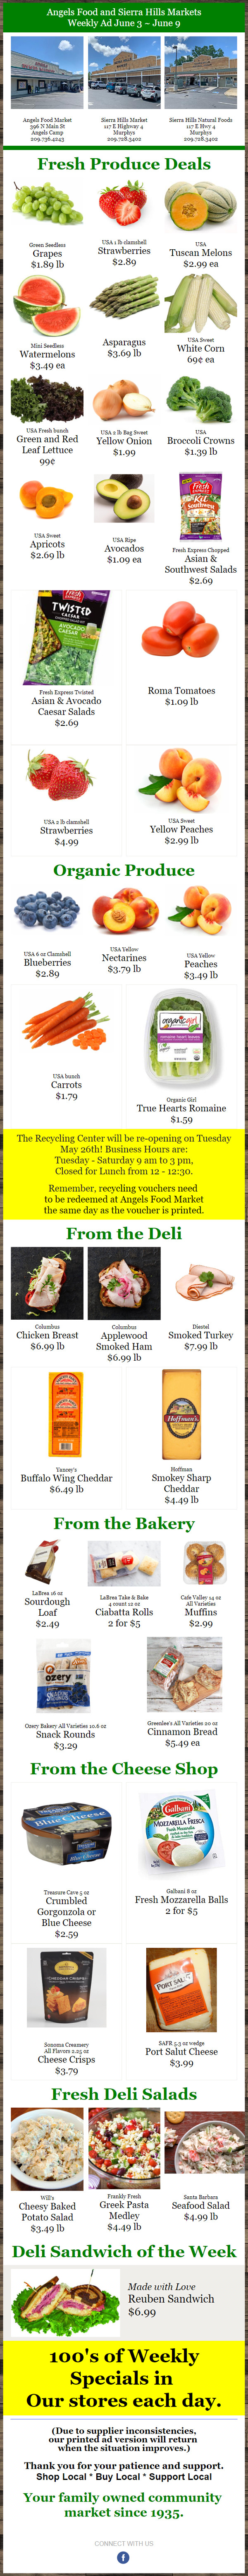 Angels Food and Sierra Hills Markets Weekly Ad & Specials Through June 9th